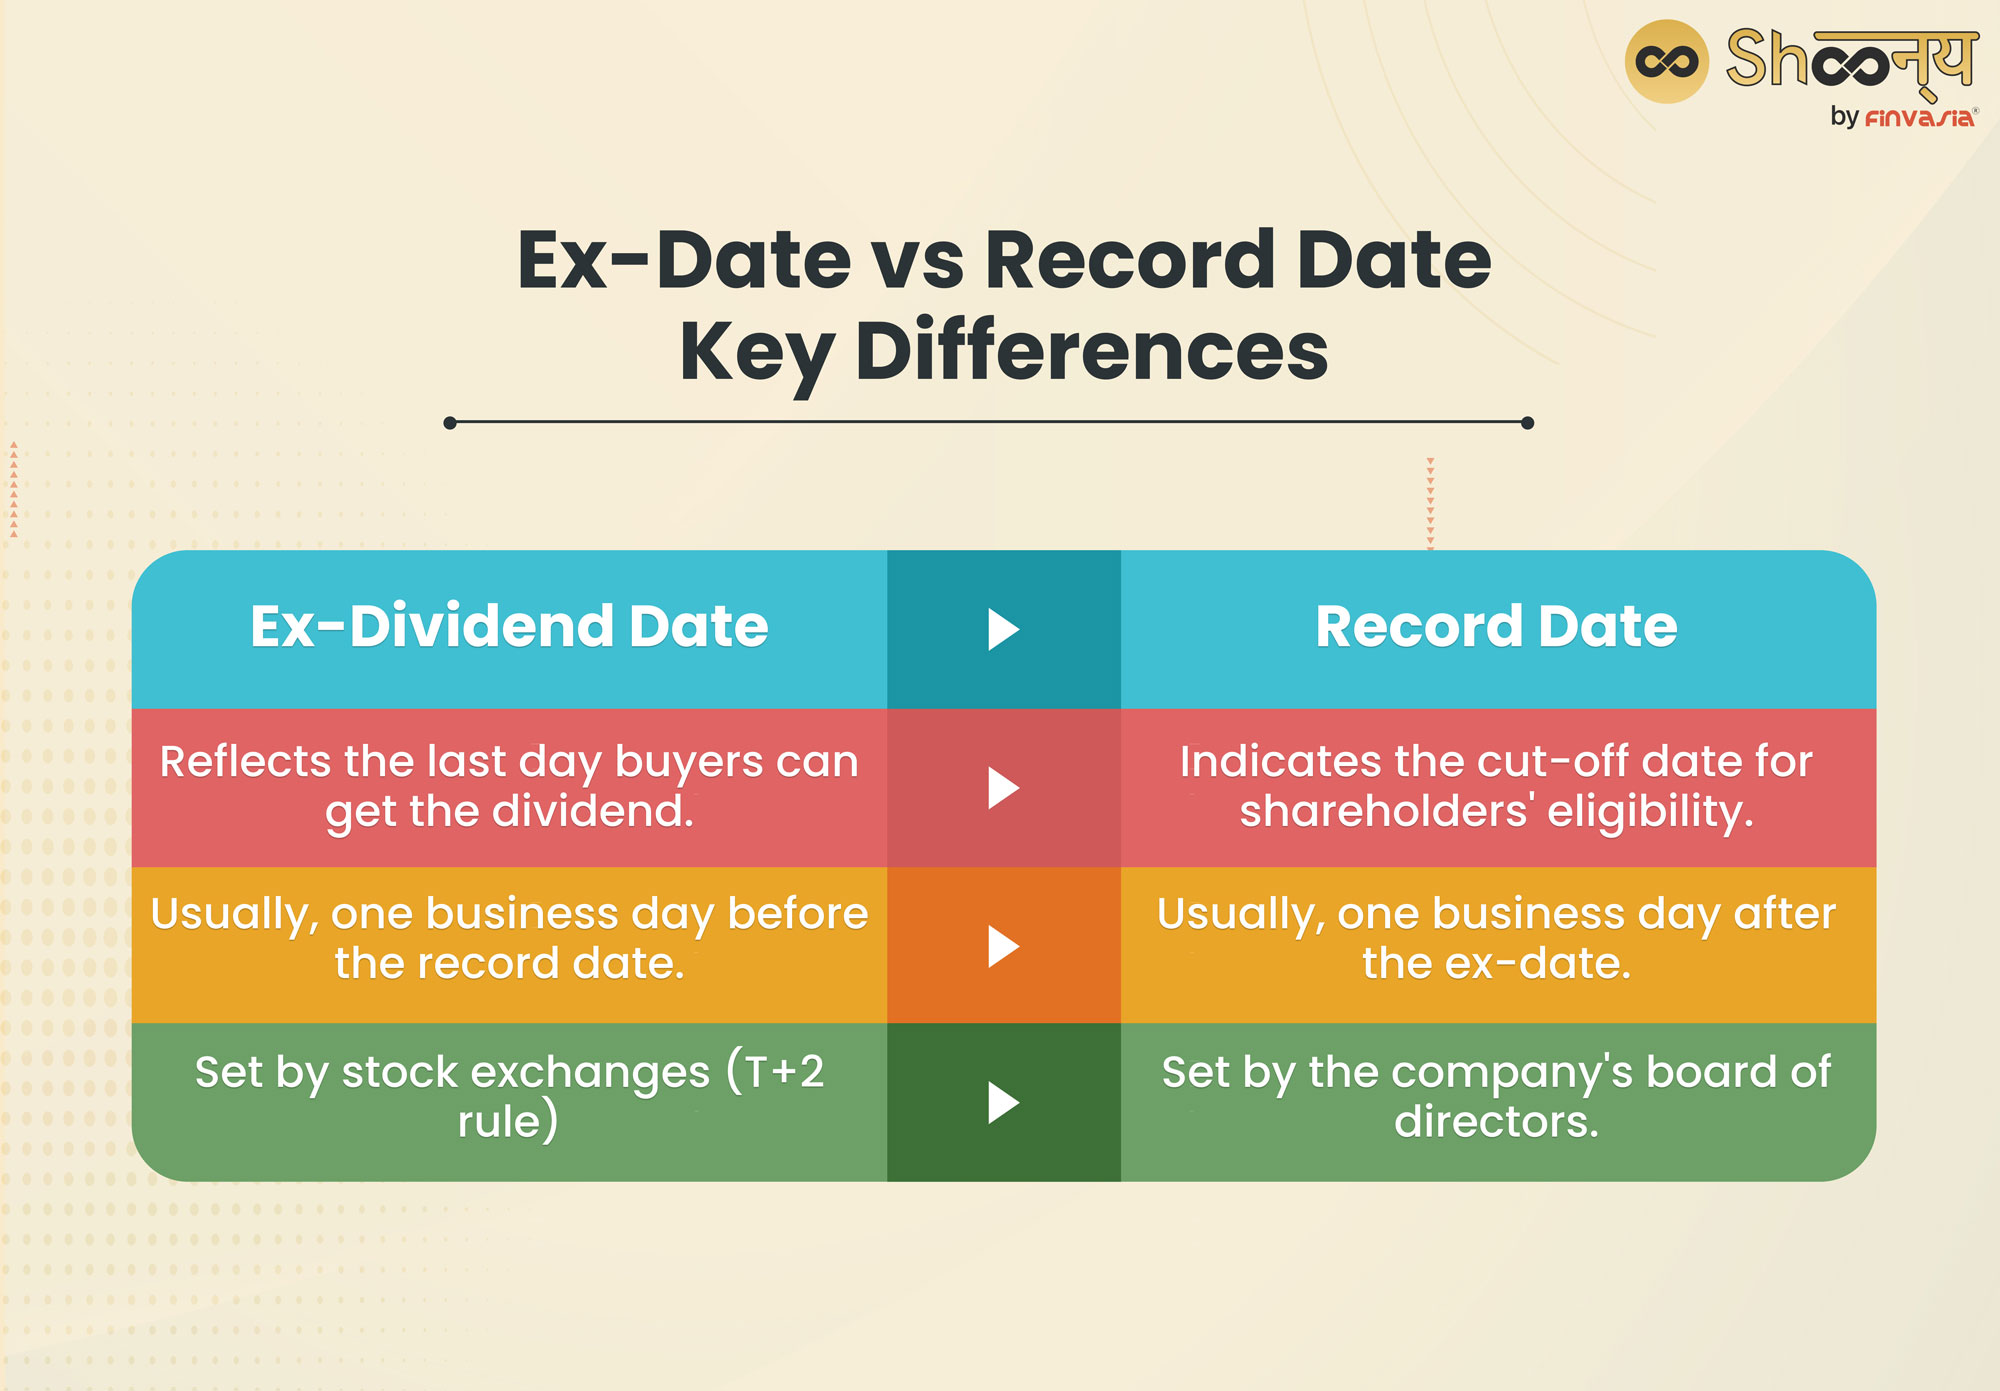 Ex-Date vs Record Date: Key Differences